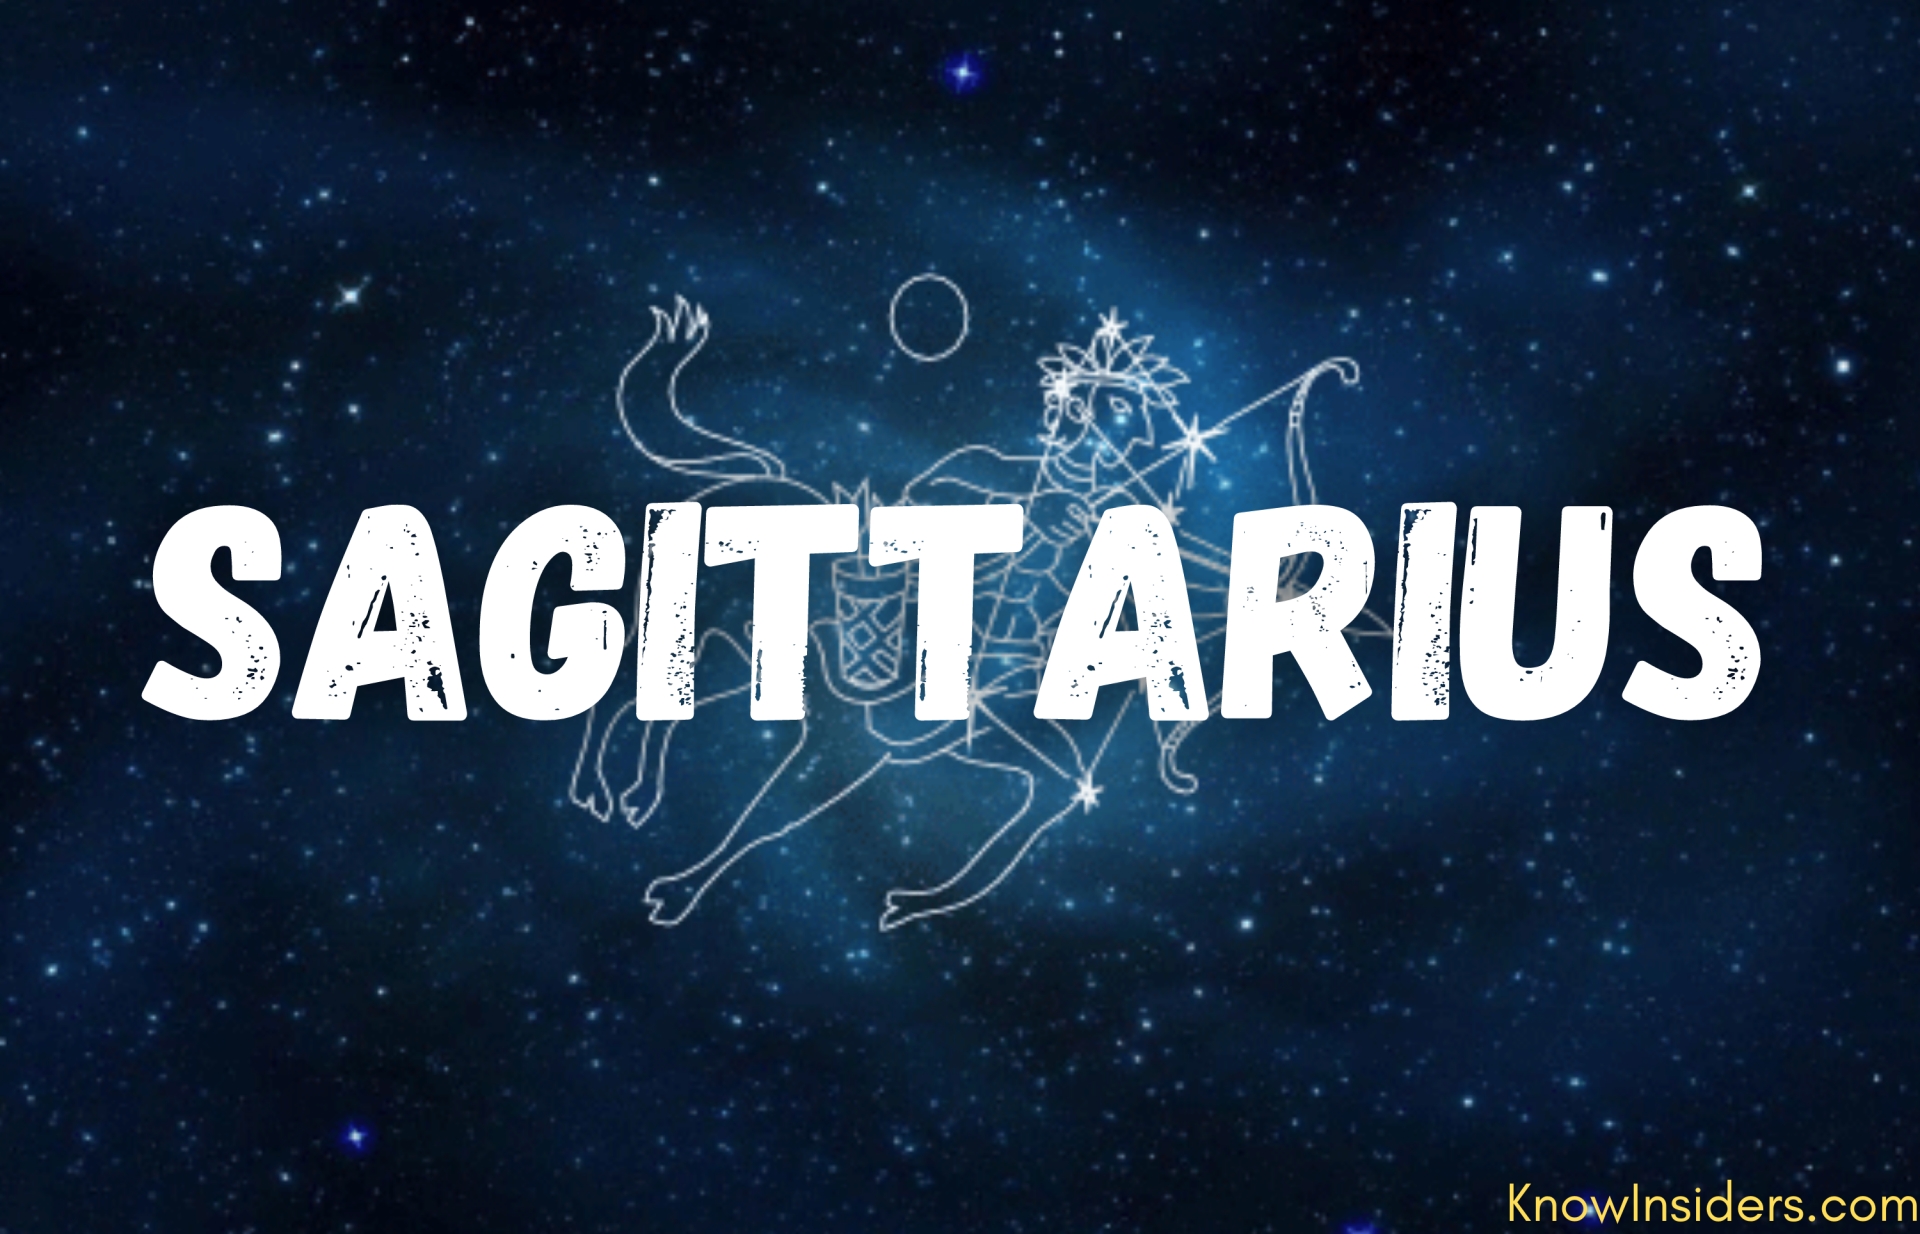 SAGITTARIUS Horoscope July 2021 - Monthly Predictions for Love, Money, Career and Health